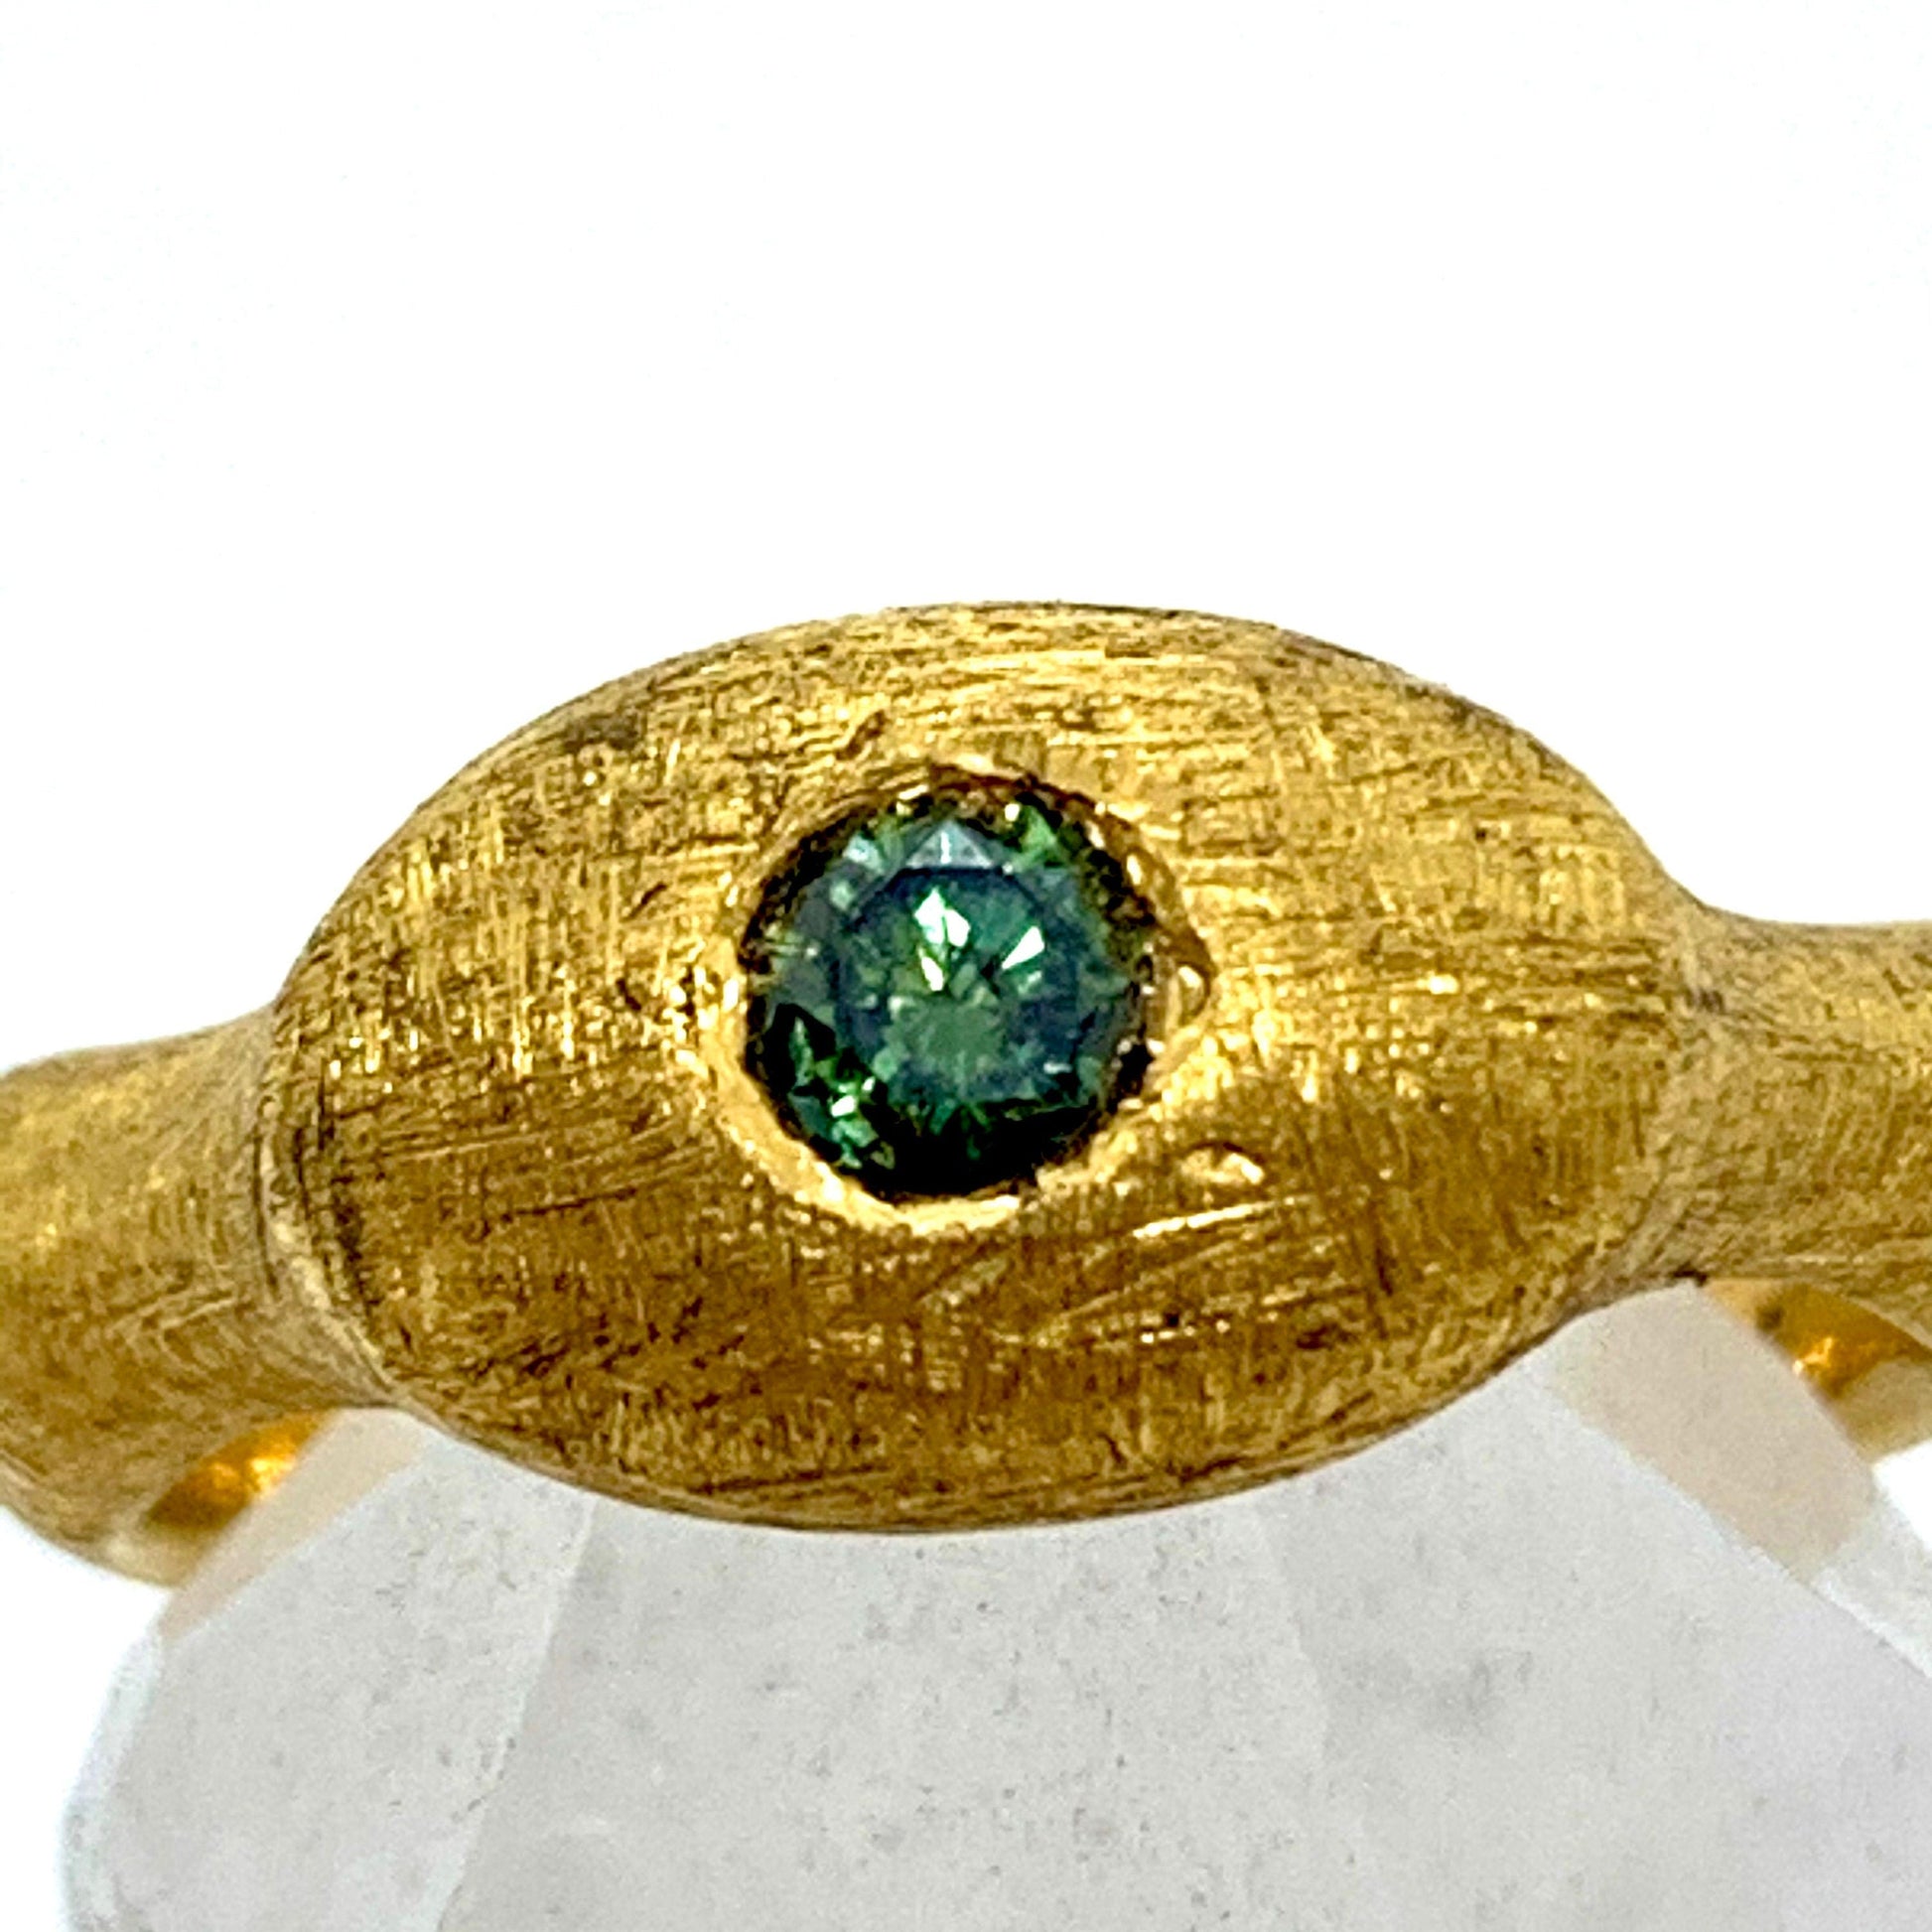 24ct PURE gold green diamond (0.17ct) handmade ring, matte.  (approx. 9gr of pure 24ct gold).